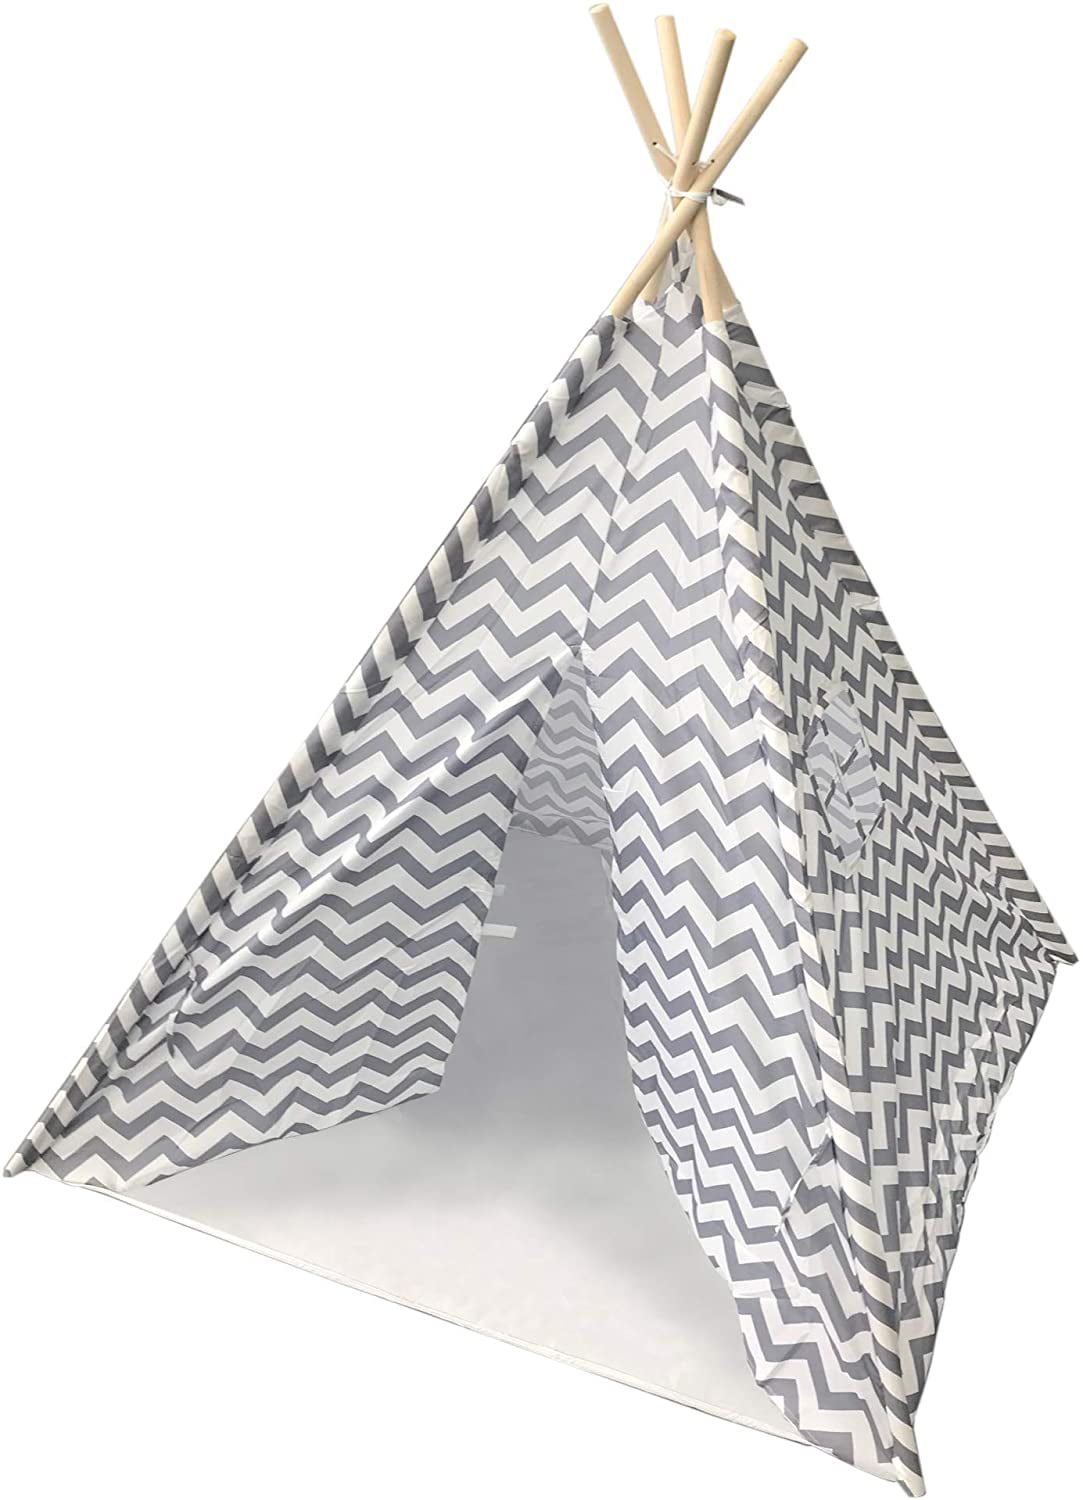 Kids Teepee Tent for Boys Girls Children Teepee Play Tent Indoor Outdoor with Carry Case Floor Mat Portable Indian Canvas Tipi Tent for Toddlers Baby Children Tee Pee Tents Grey Chevron Teepee Boys 